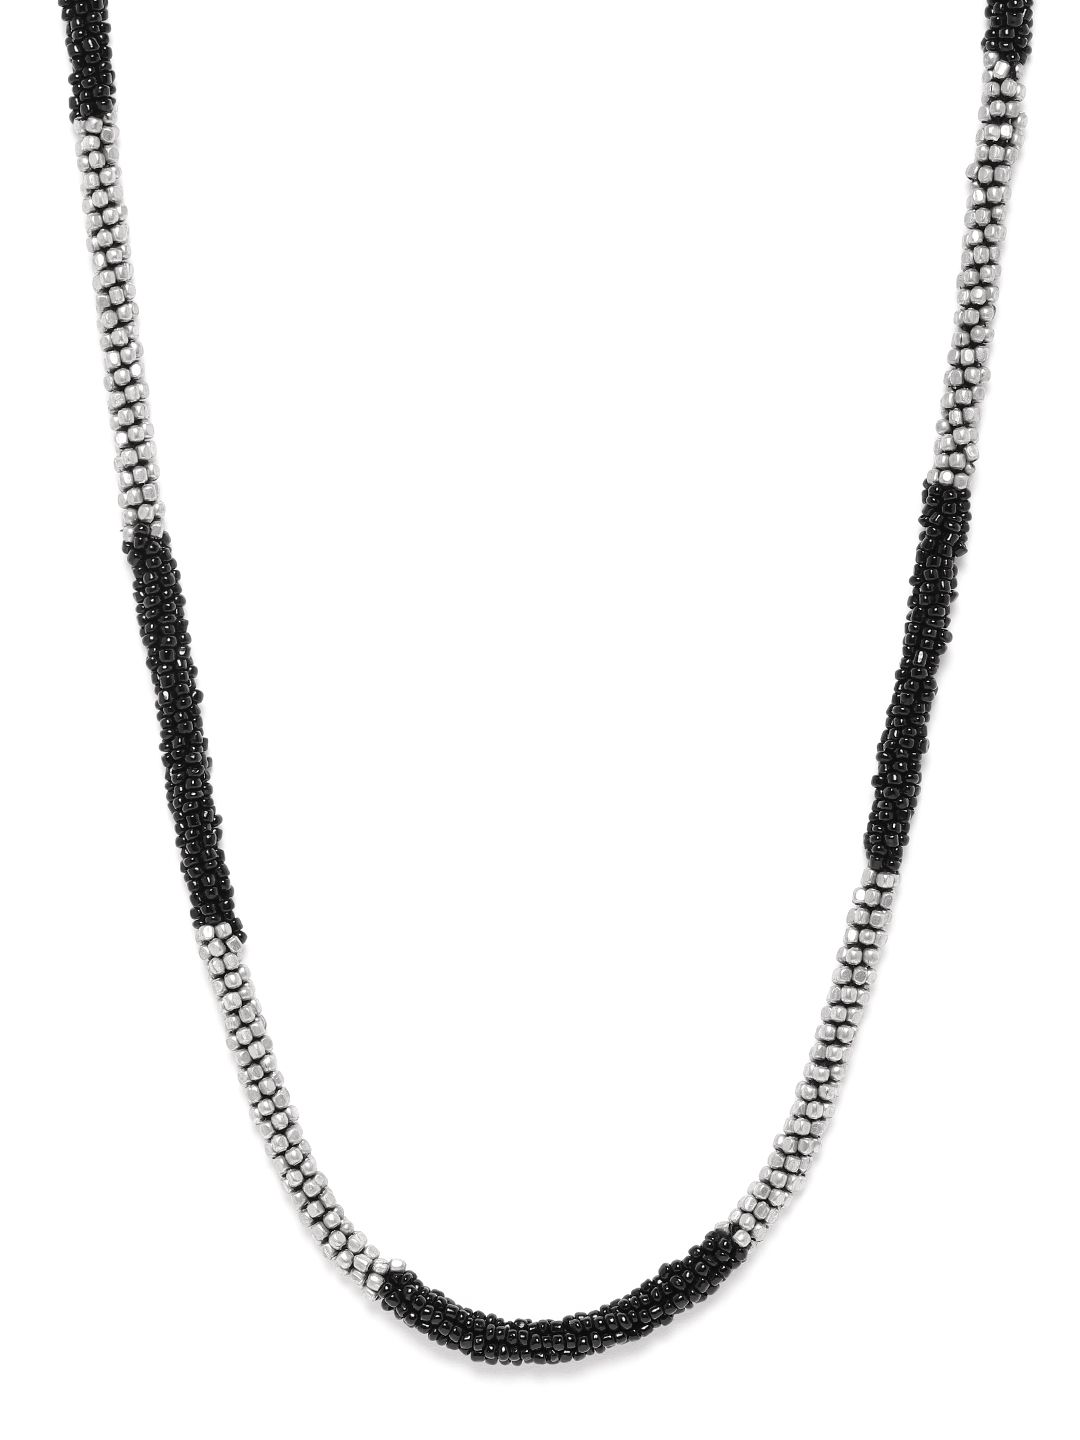 RICHEERA Women Black & Silver-Toned Gold-Plated Beaded Necklace Price in India